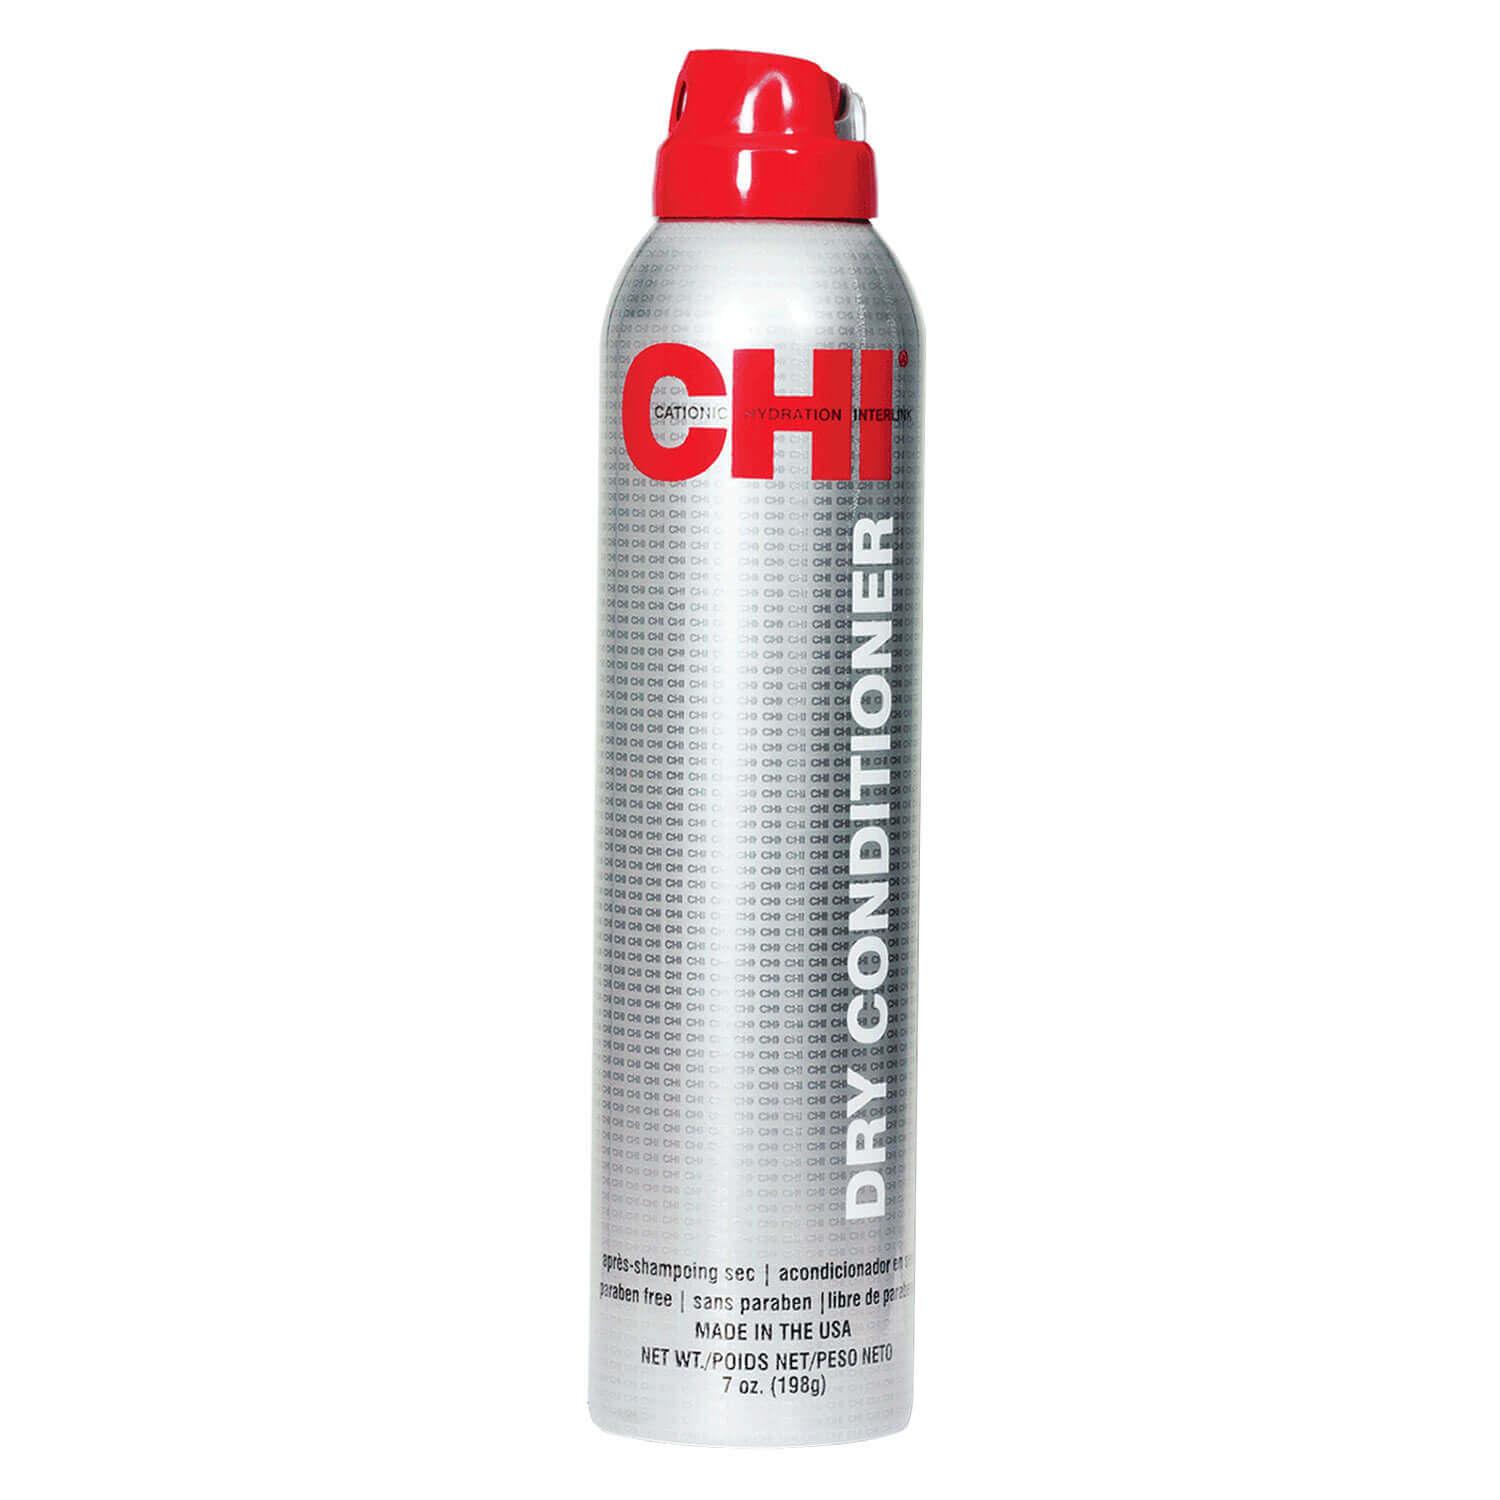 CHI Styling - Dry Conditioner